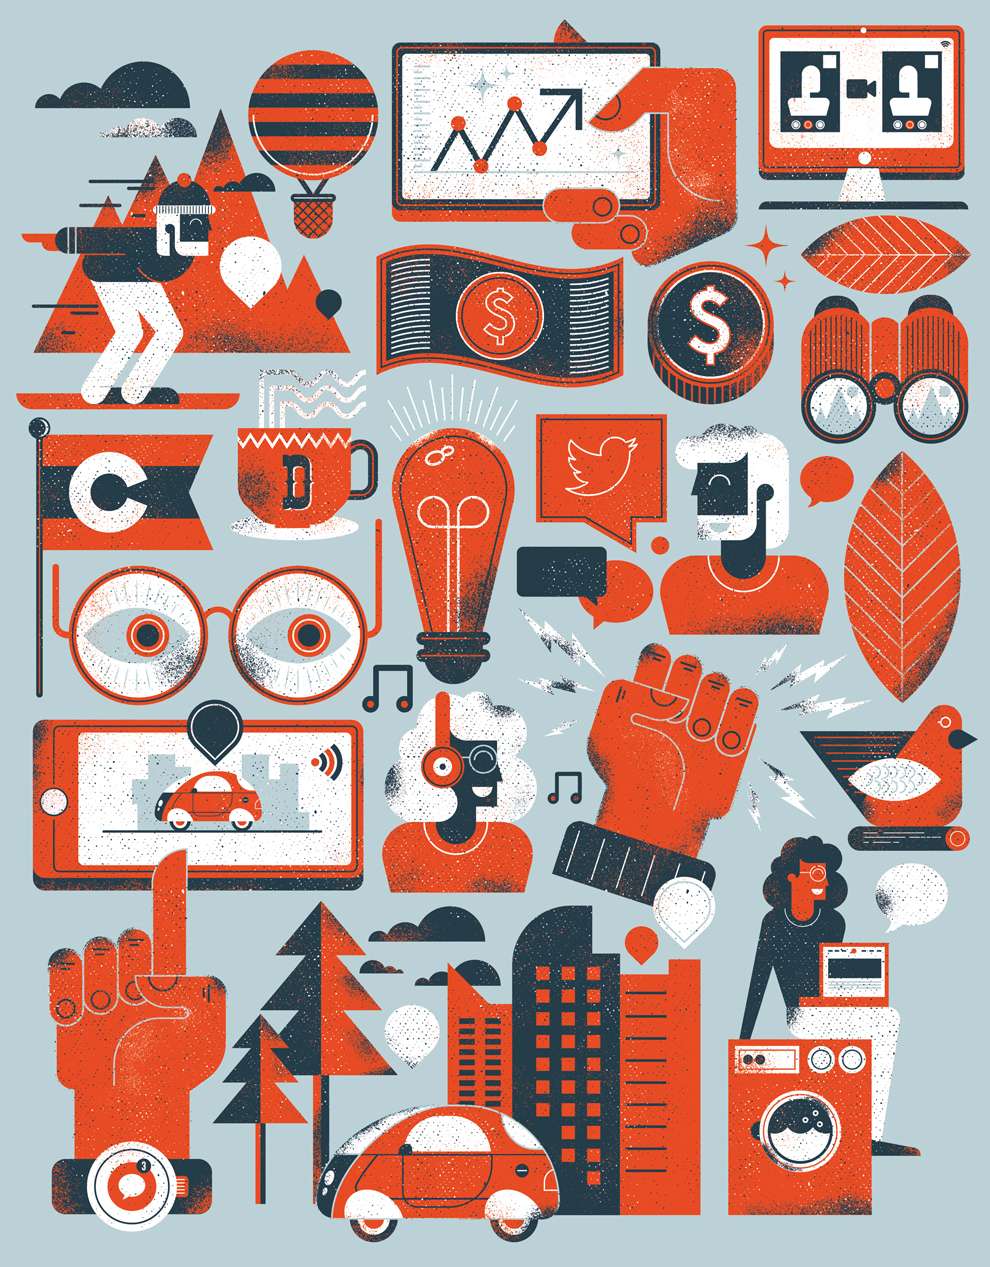 Ahoy There, Textural and digital infographic illustration